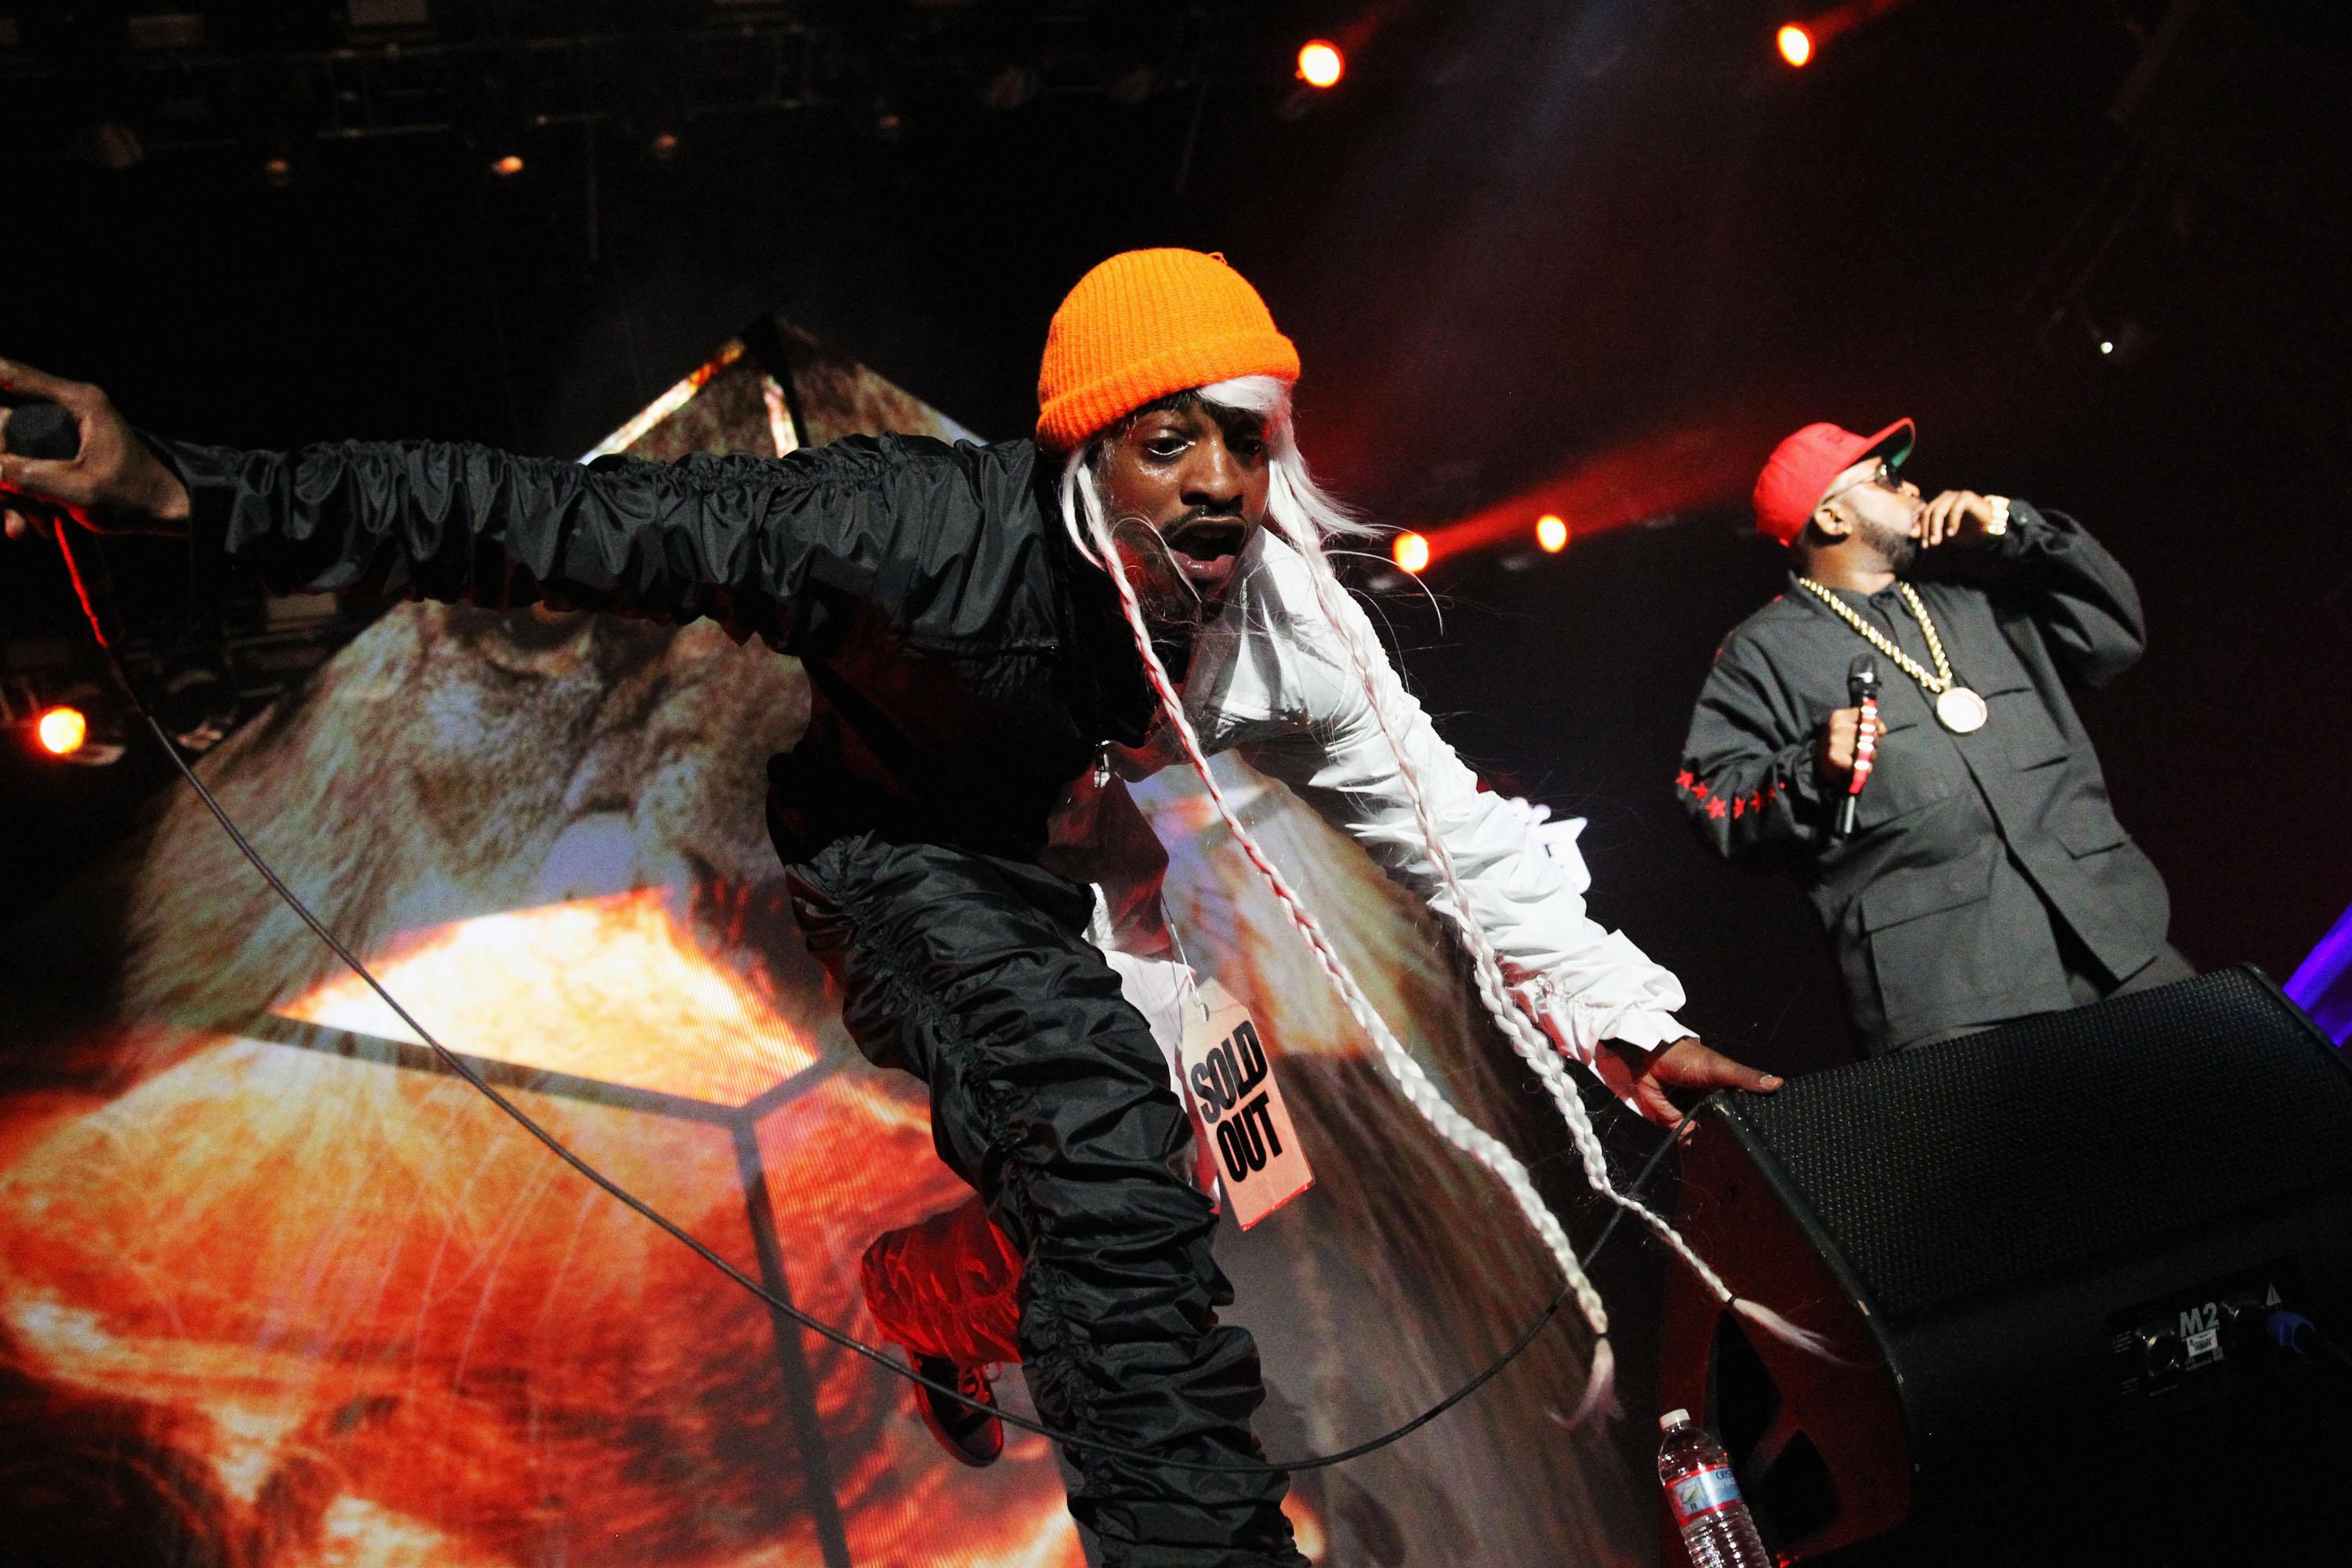 Two men in orange hats, black shirts, and black pants stand on a concert stage performing in front of red stage lights.